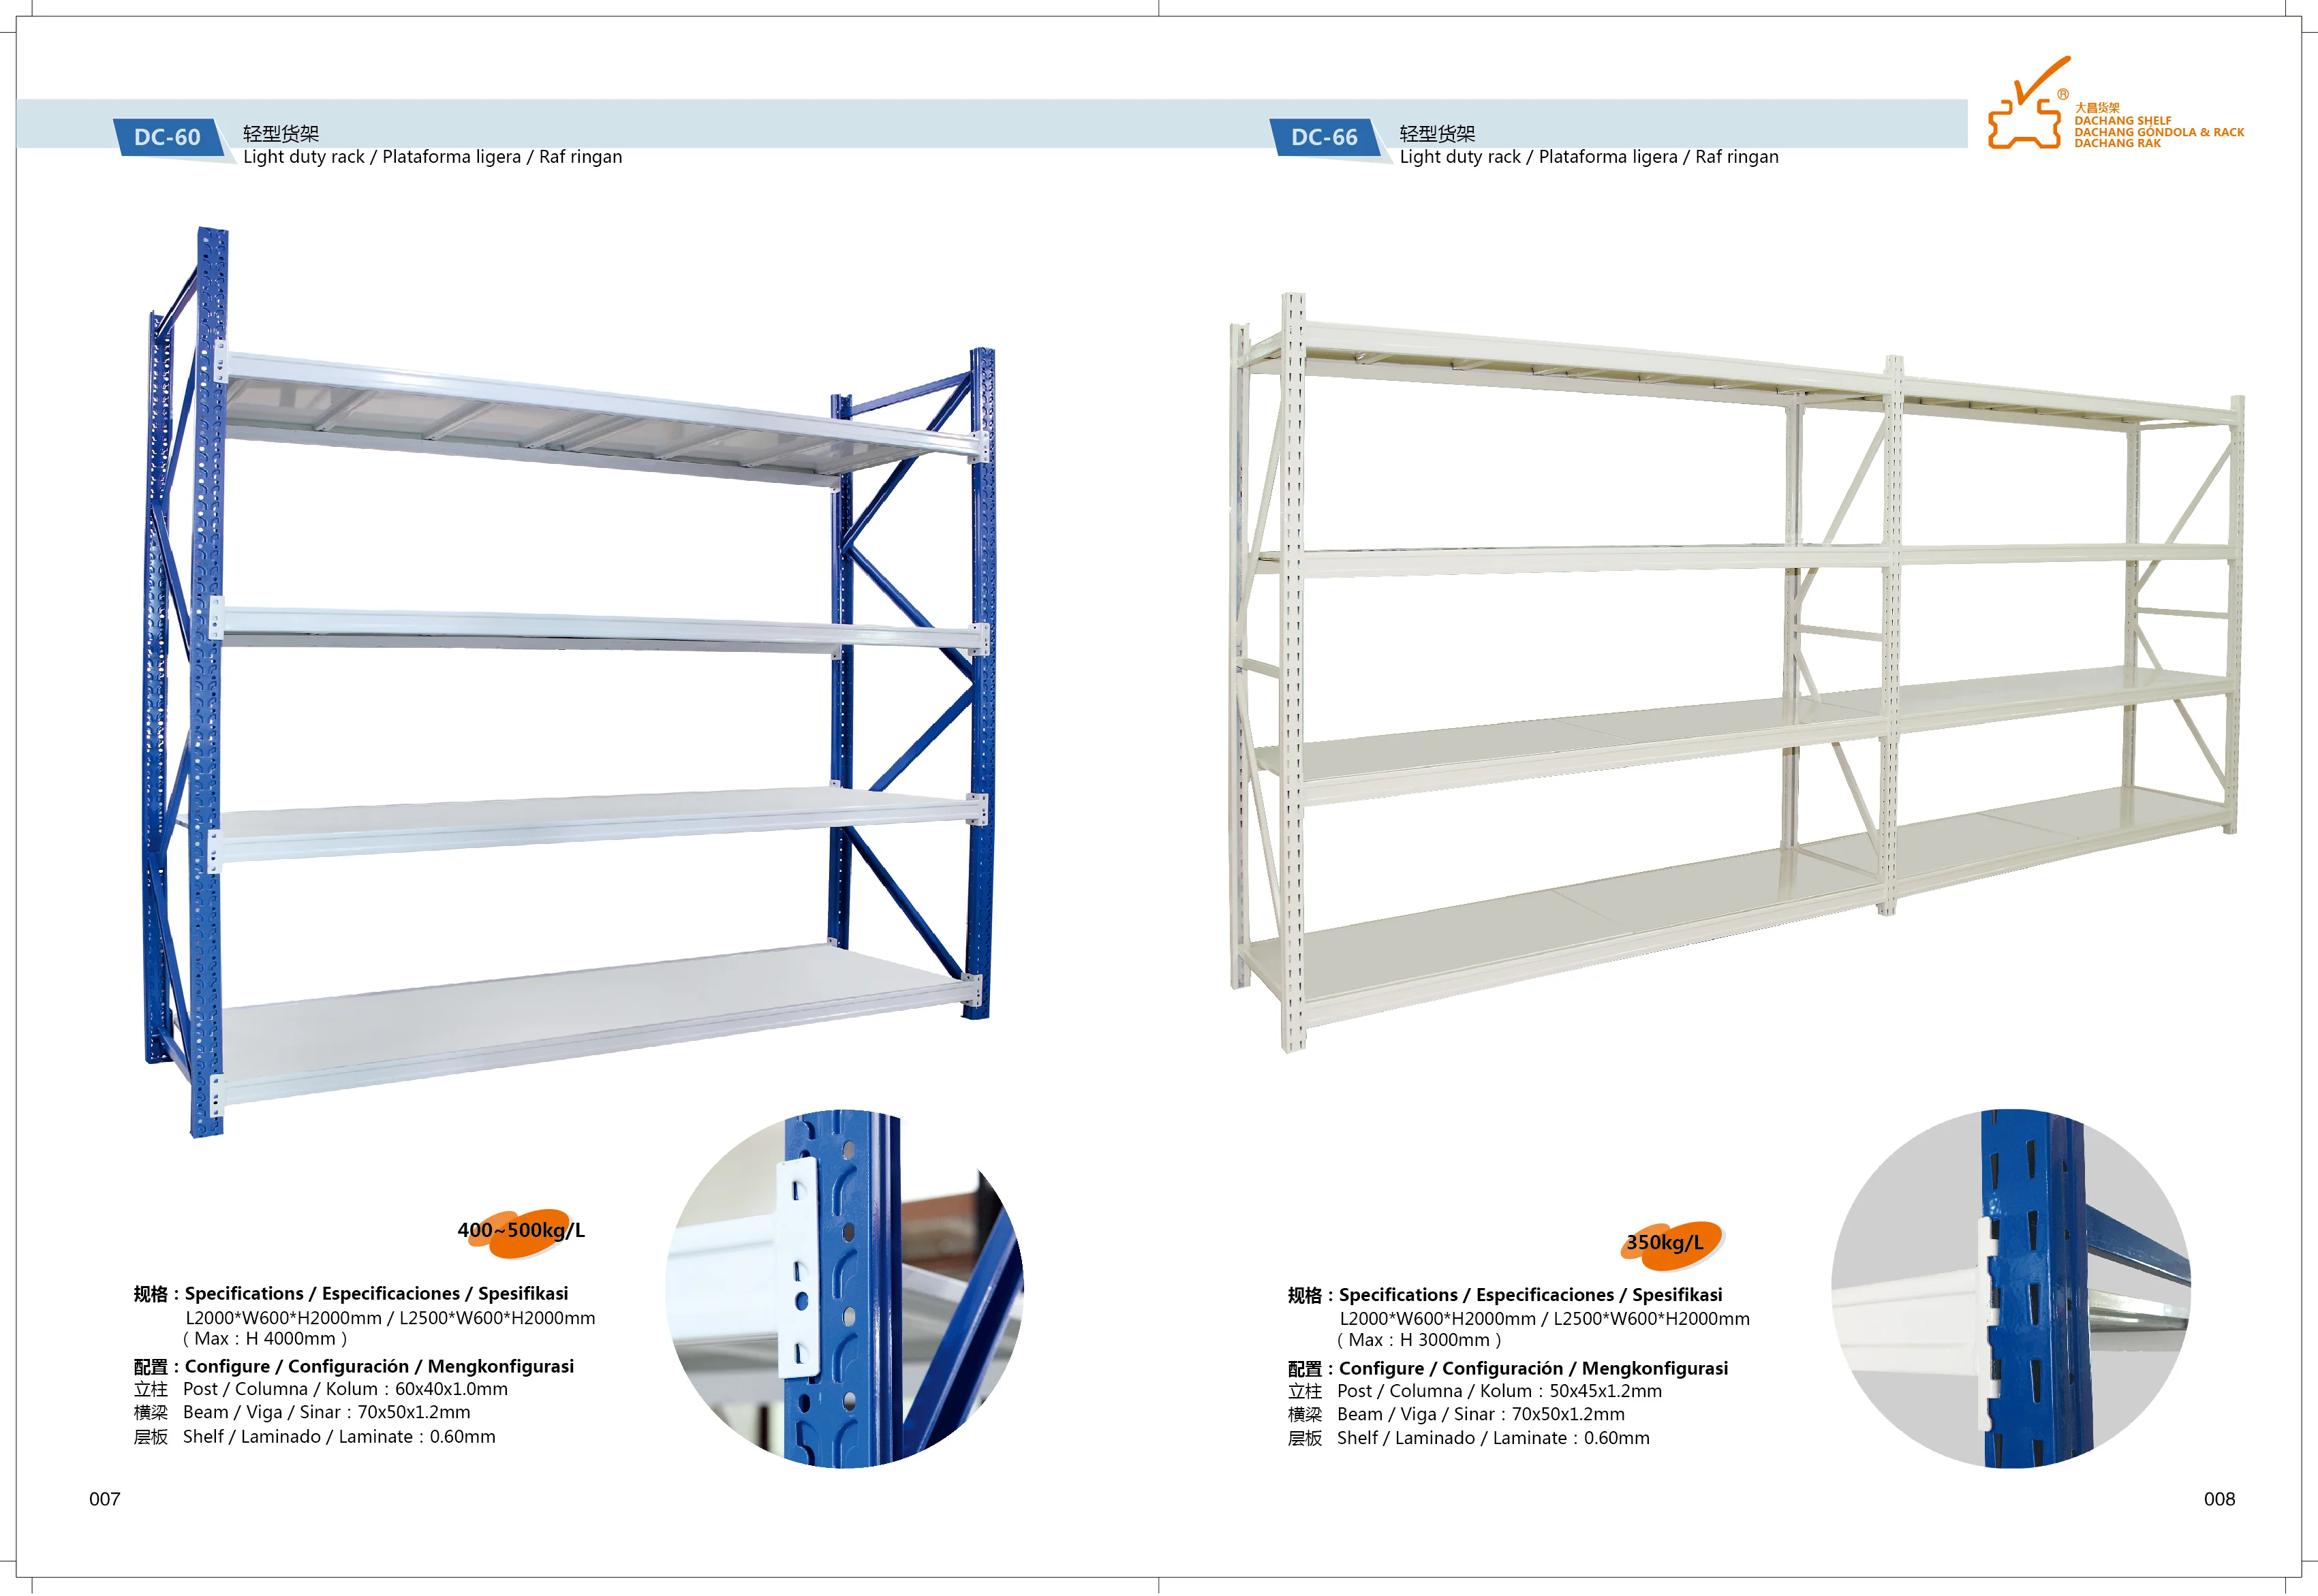 How to Choose the Right Light Duty Racking System for Your Needs?